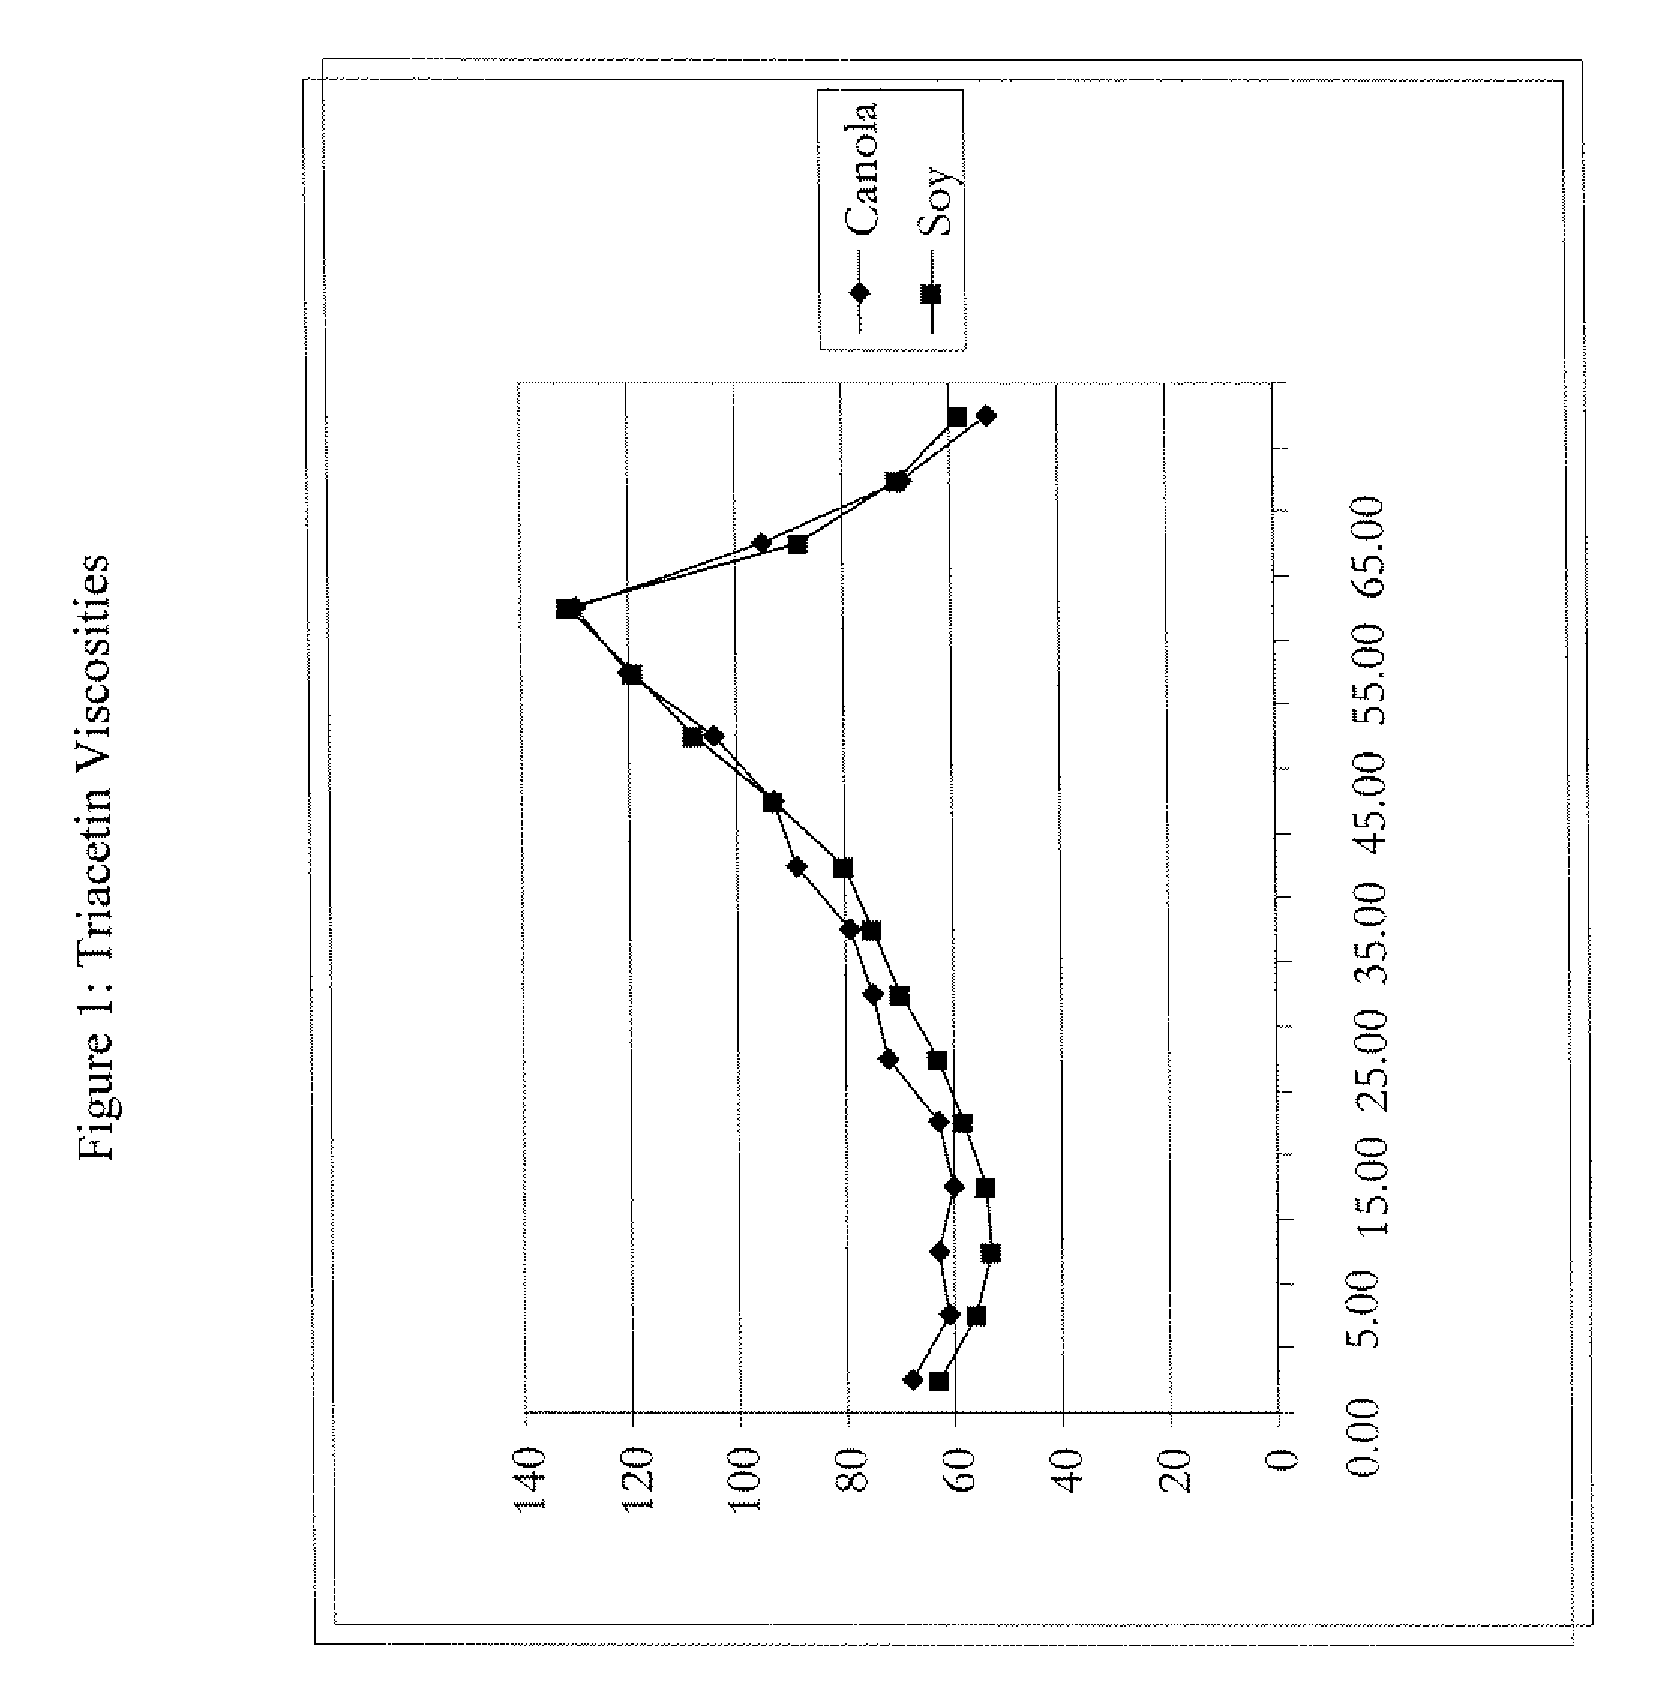 Controlled viscosity oil composition and method of making